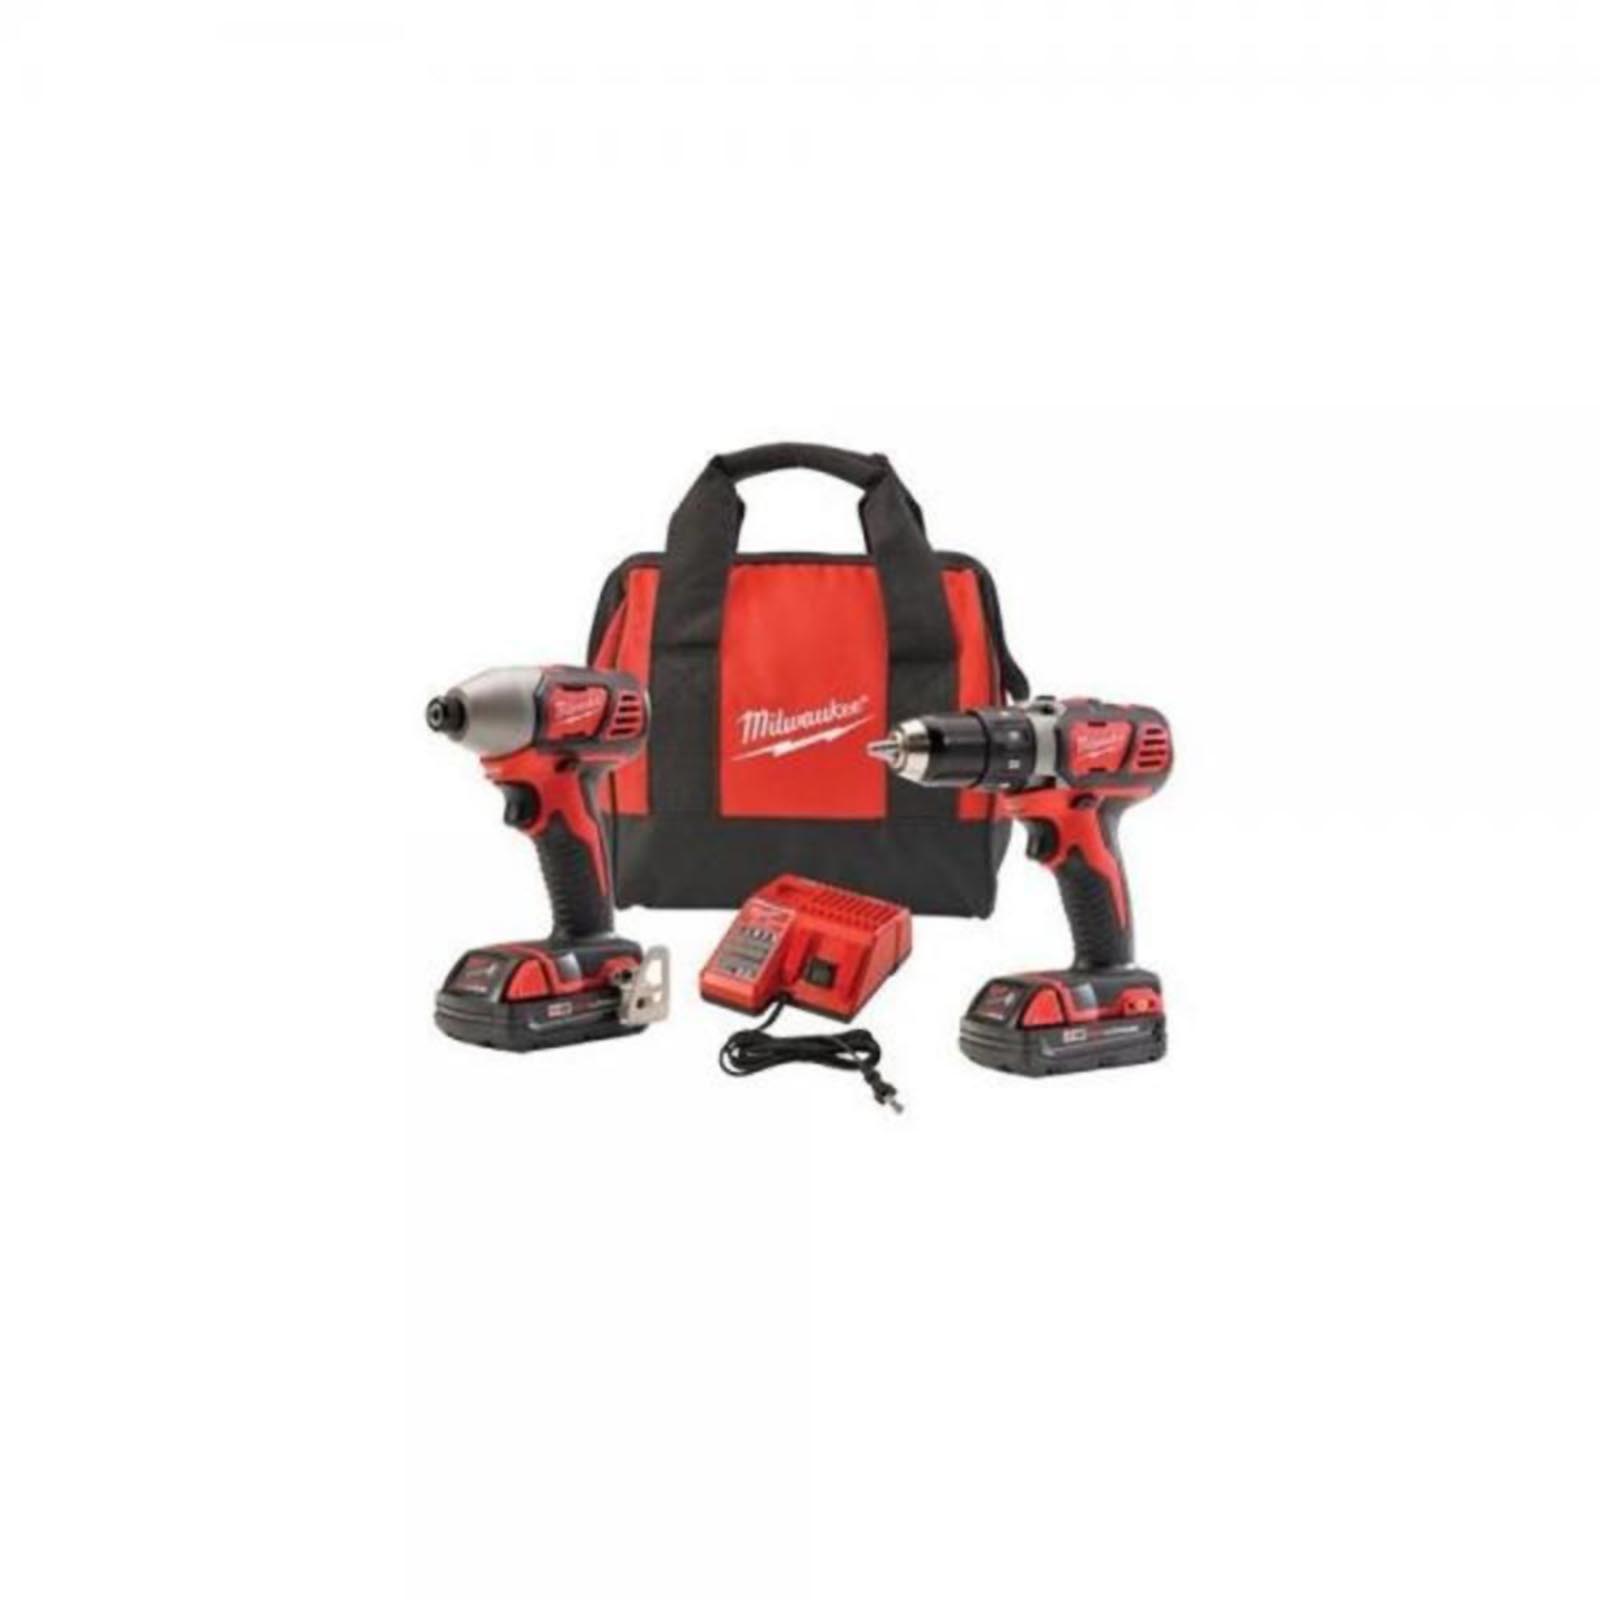 Milwaukee 2691-22 18V Compact Drill and Impact Driver Combo Kit